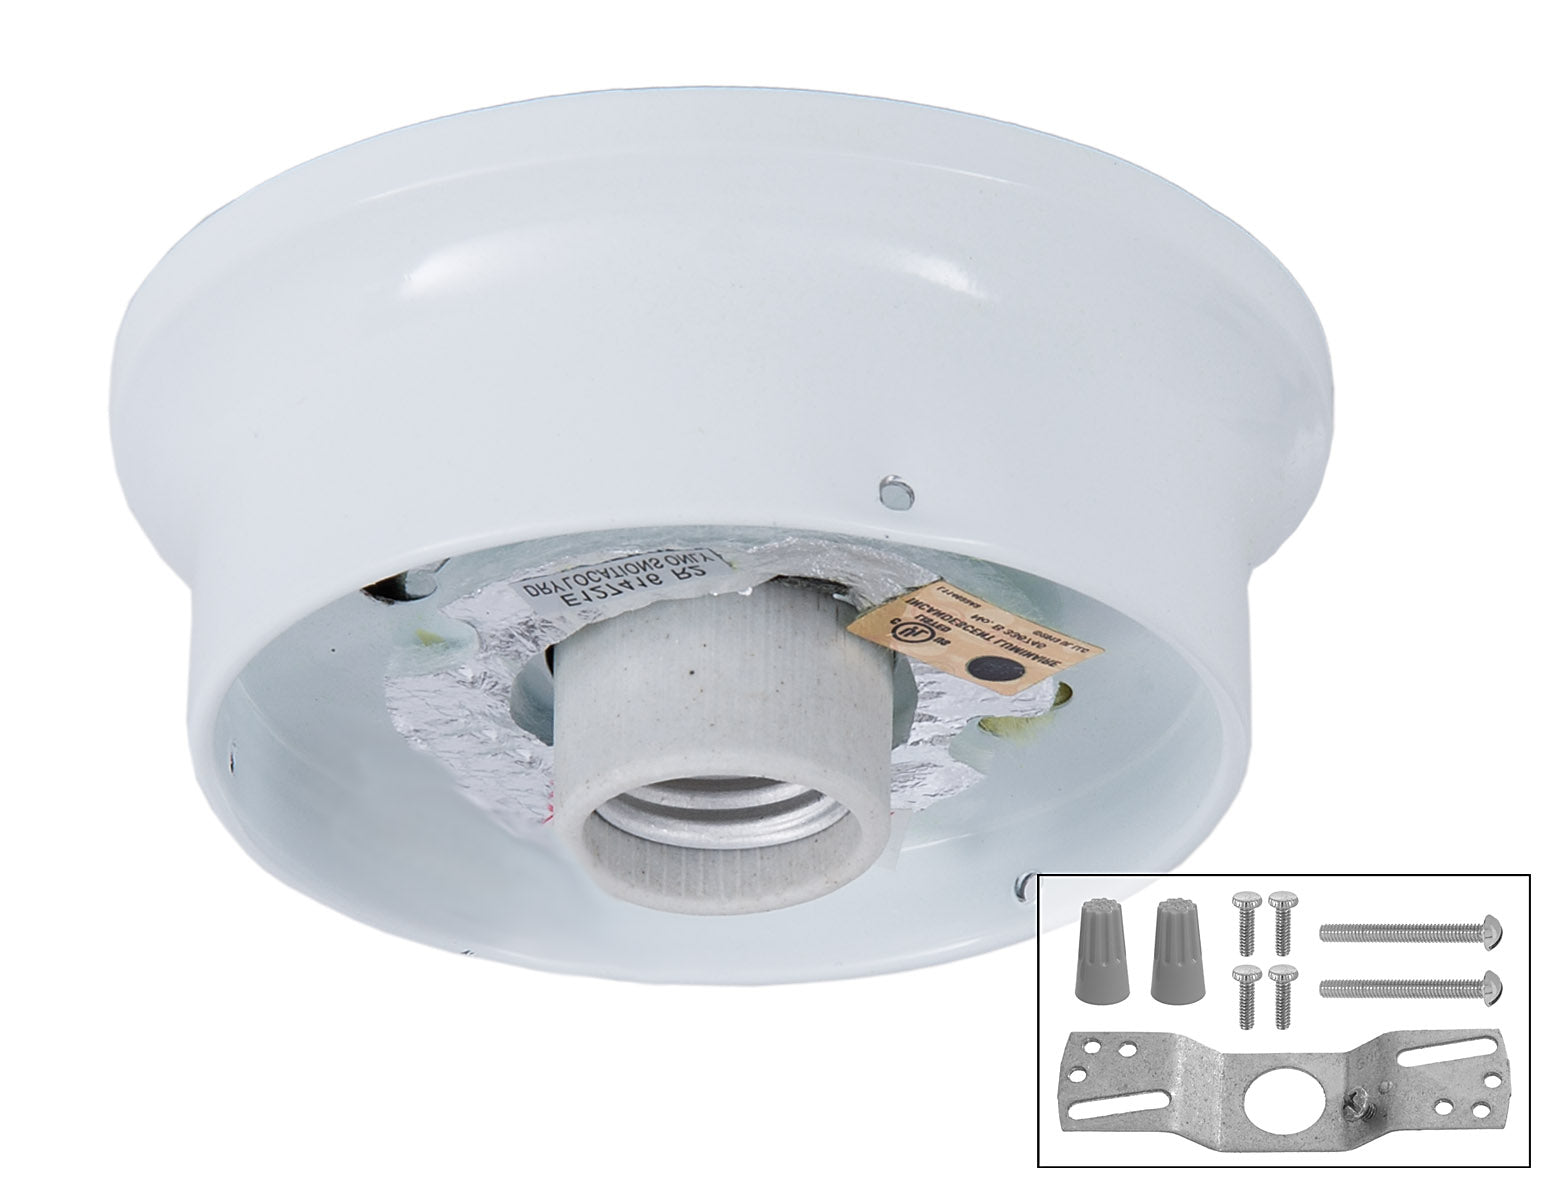 4 Inch Fitter Wired Flush Mount Ceiling Fixutre in White Finish